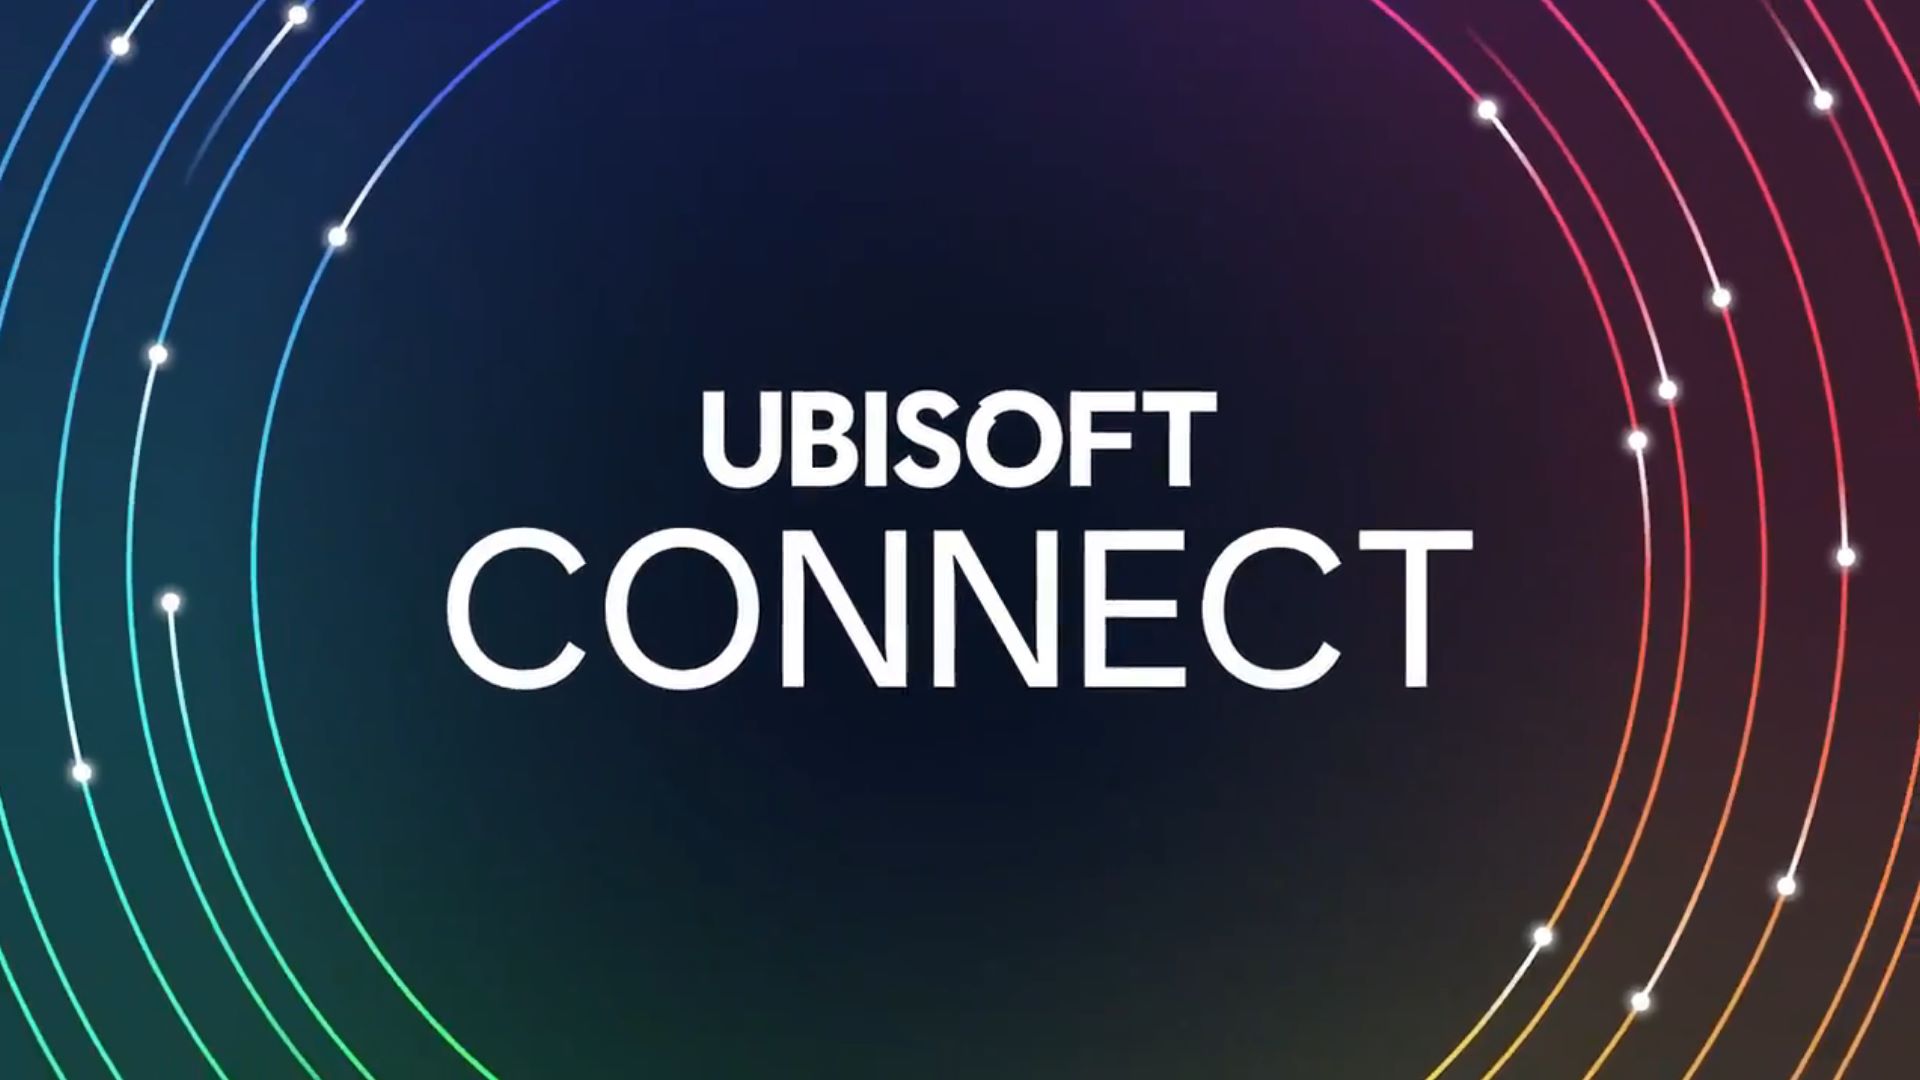 Ubisoft Connect (Uplay) 148.0.10969 instal the new version for windows